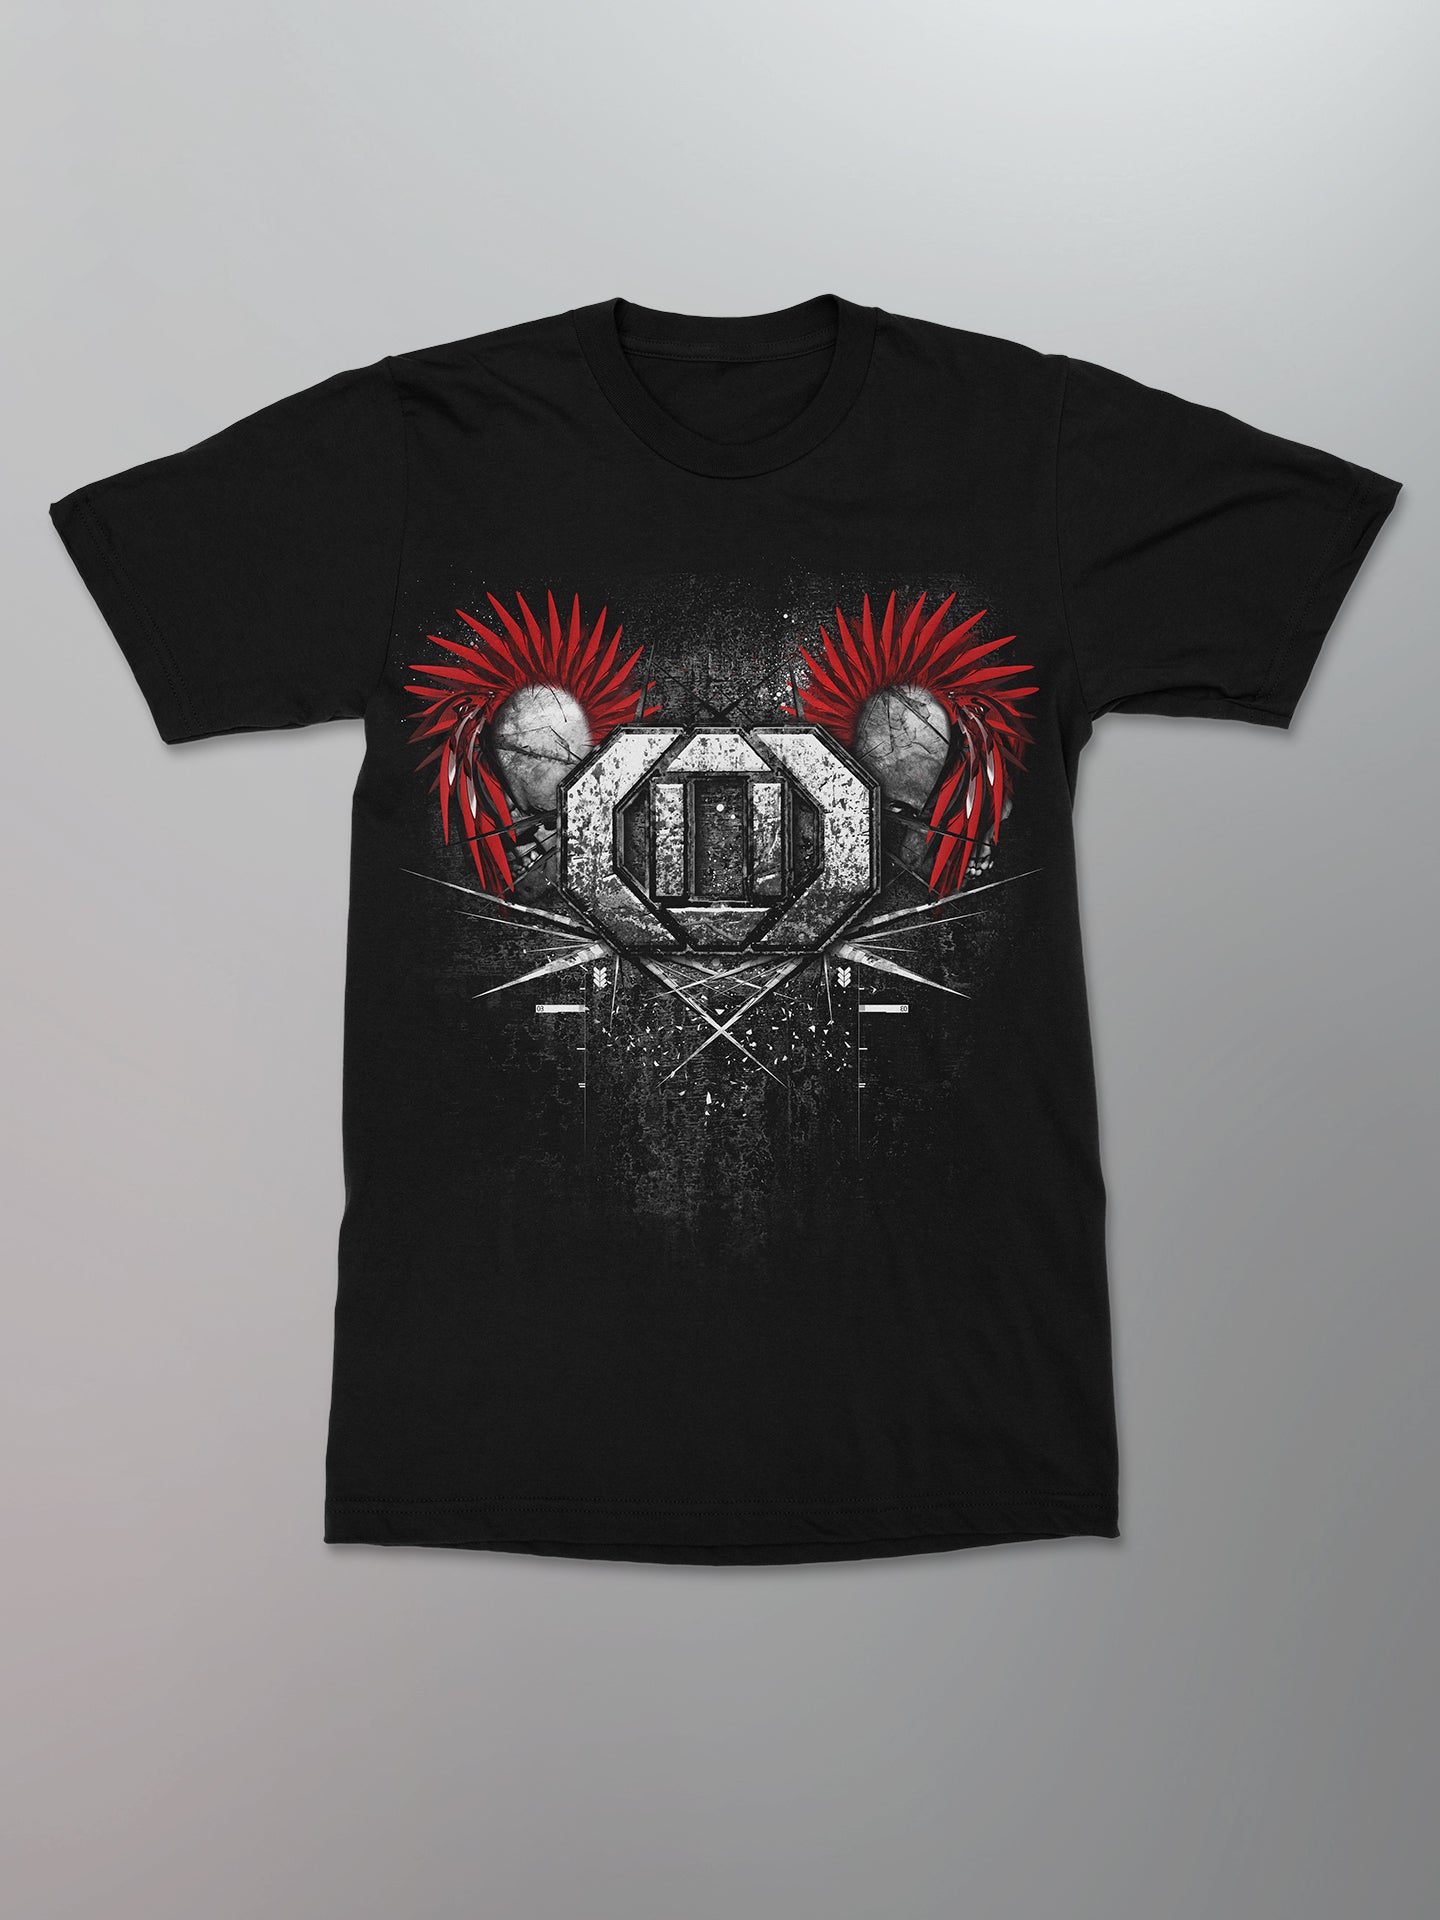 Celldweller - Solid State Shirt [Black]